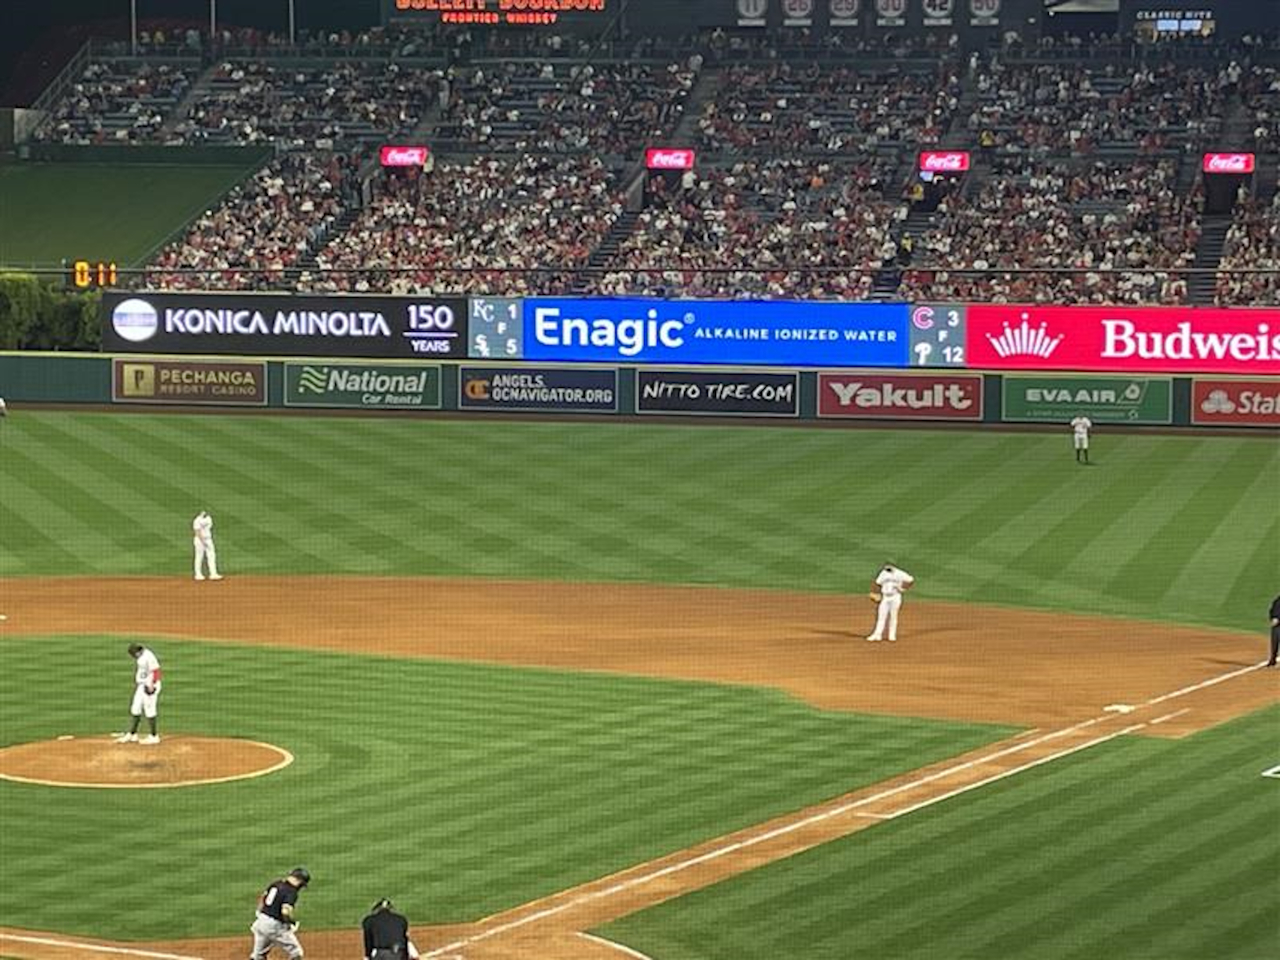 Enagic announce partnership with The Los Angeles Angels